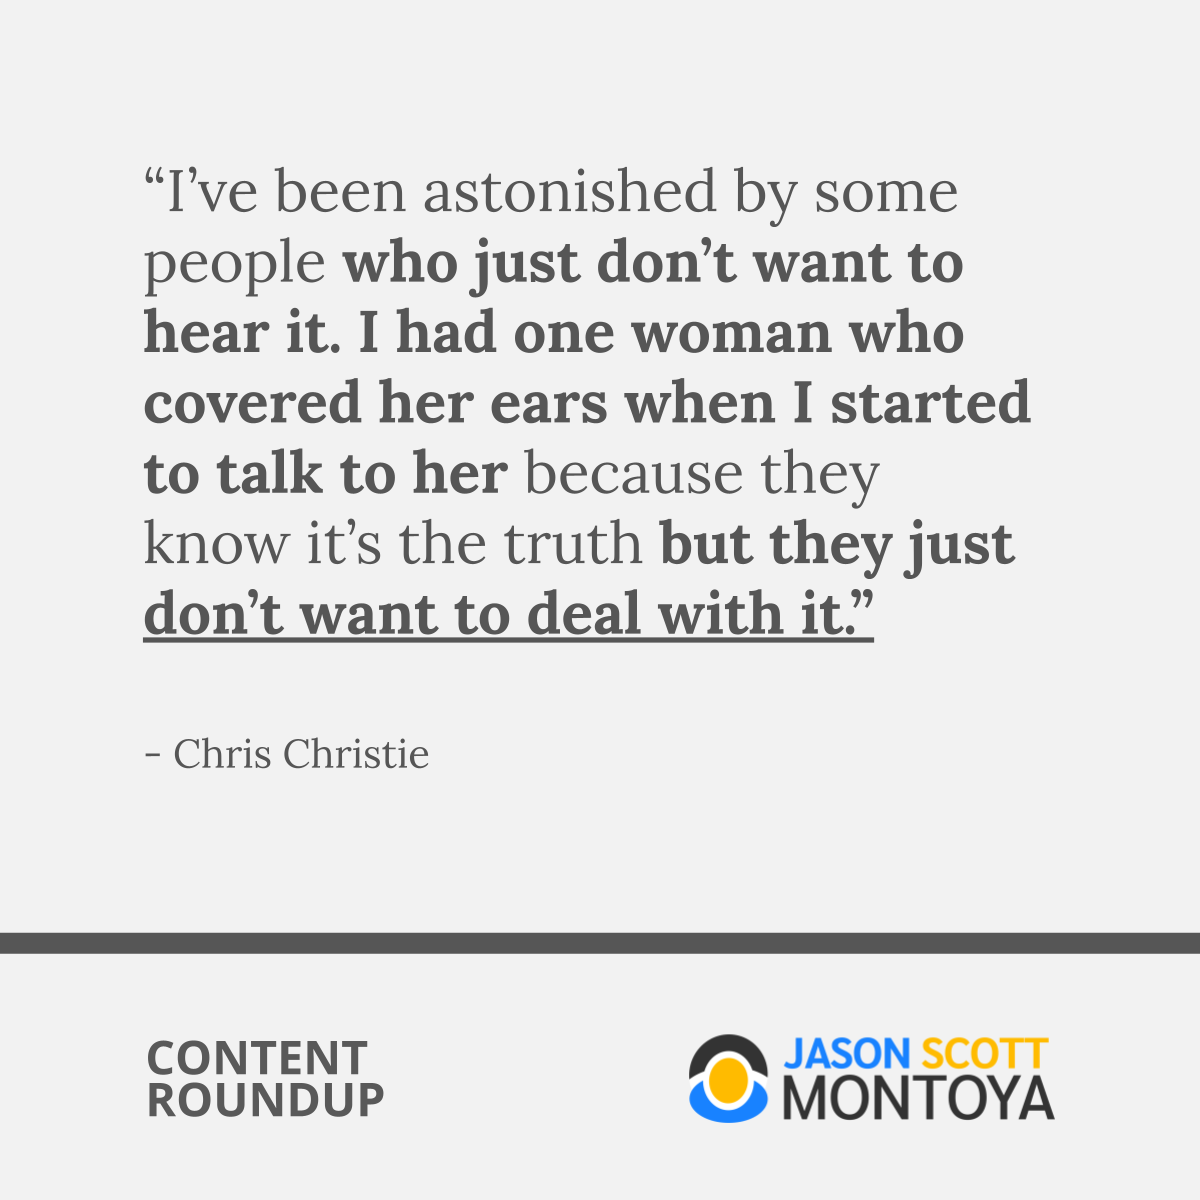 “I’ve been astonished by some people who just don’t want to hear it. I had one woman who covered her ears when I started to talk to her because they know it’s the truth but they just don’t want to deal with it.”  - Chris Christie